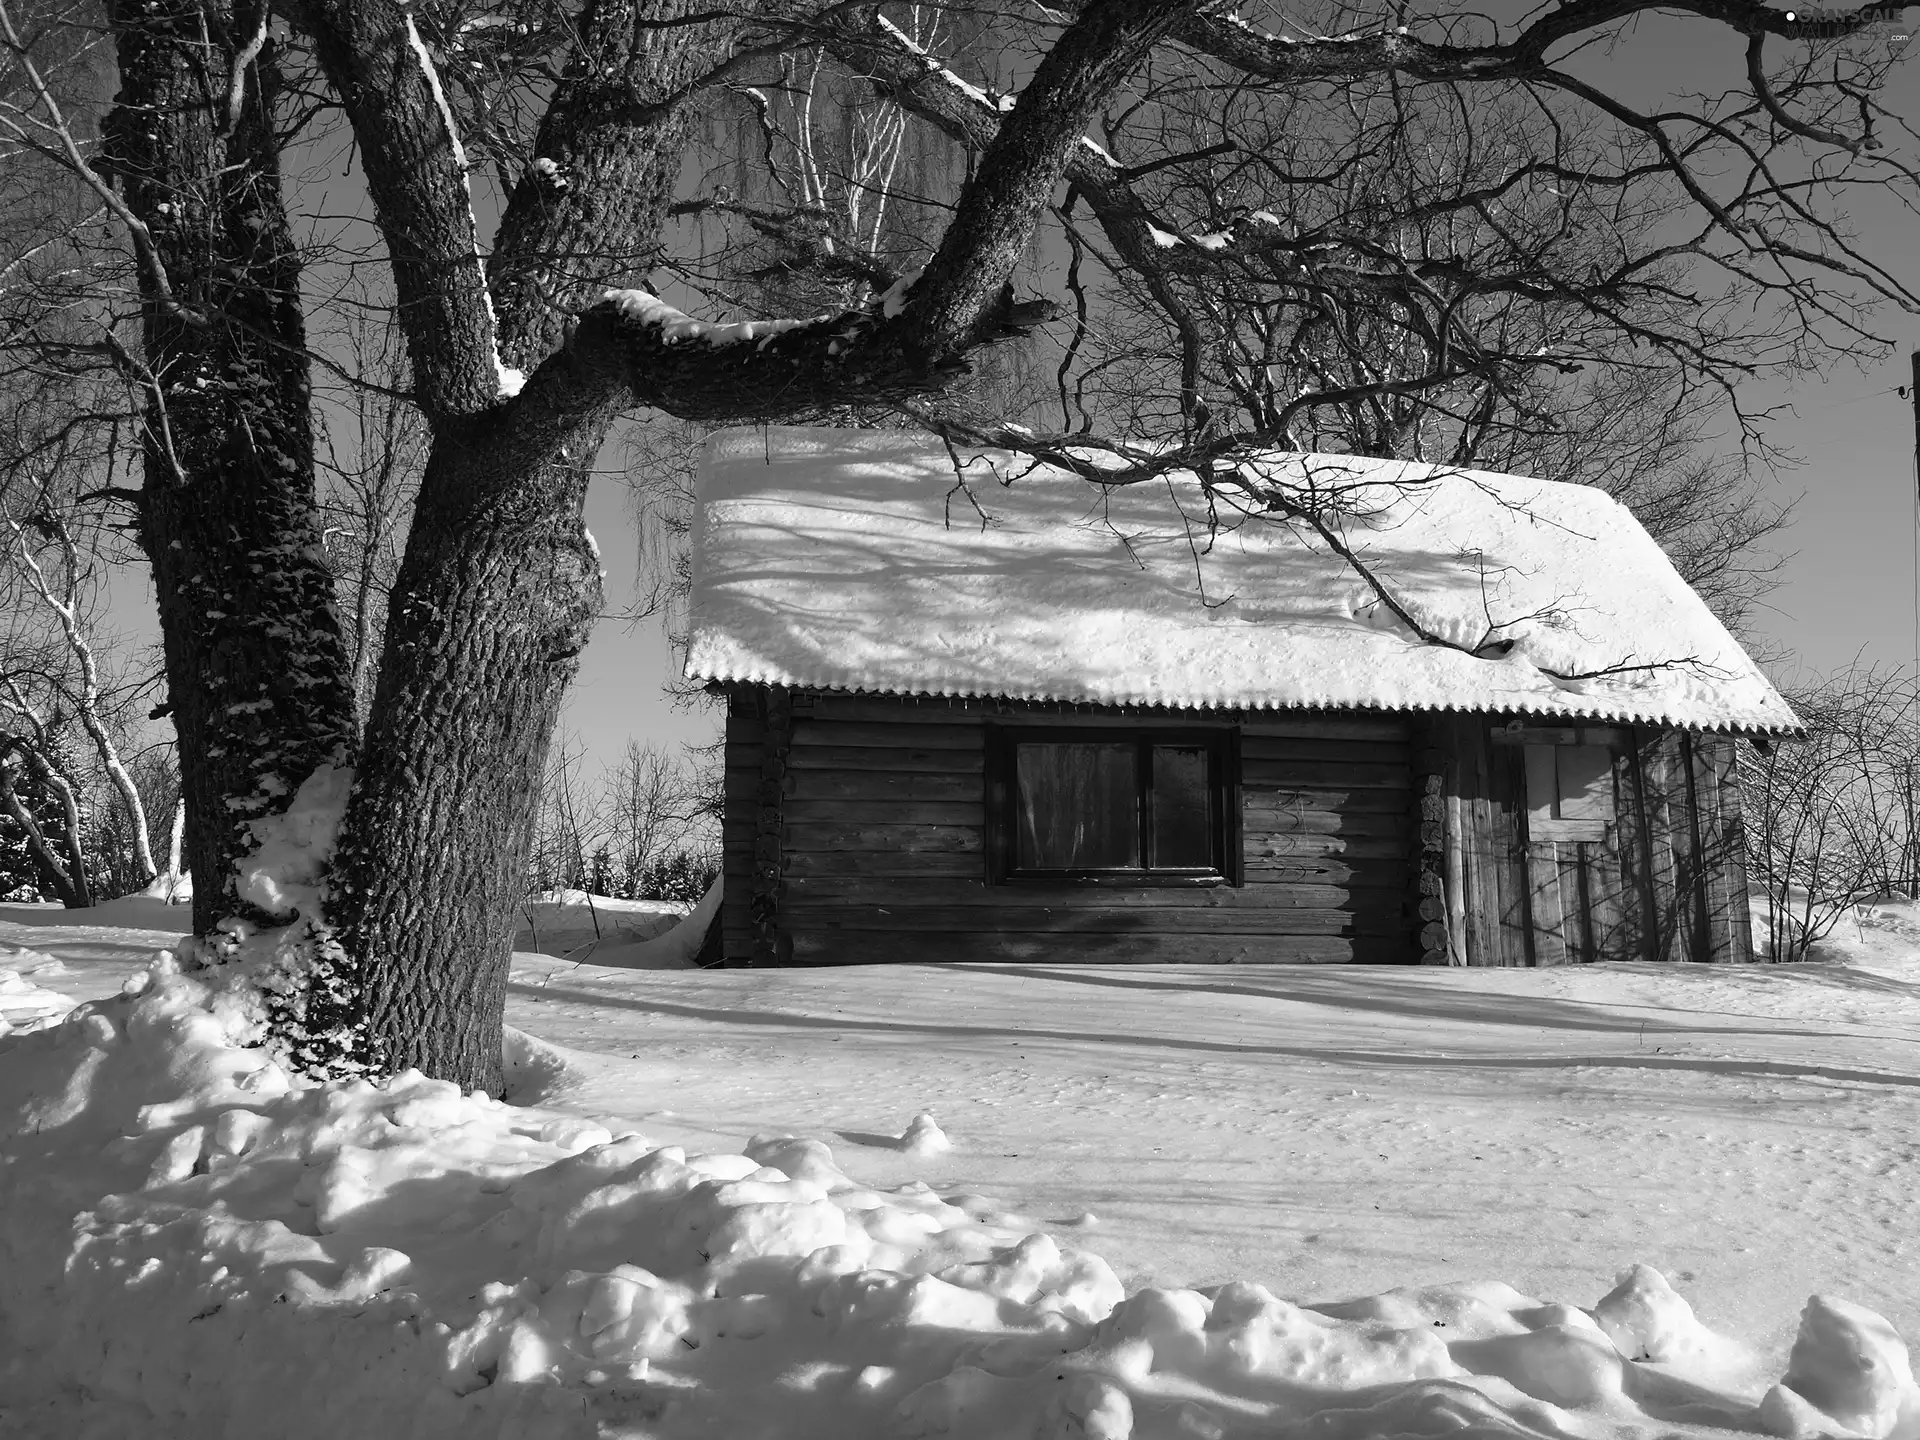 Old car, house, snow, trees, winter